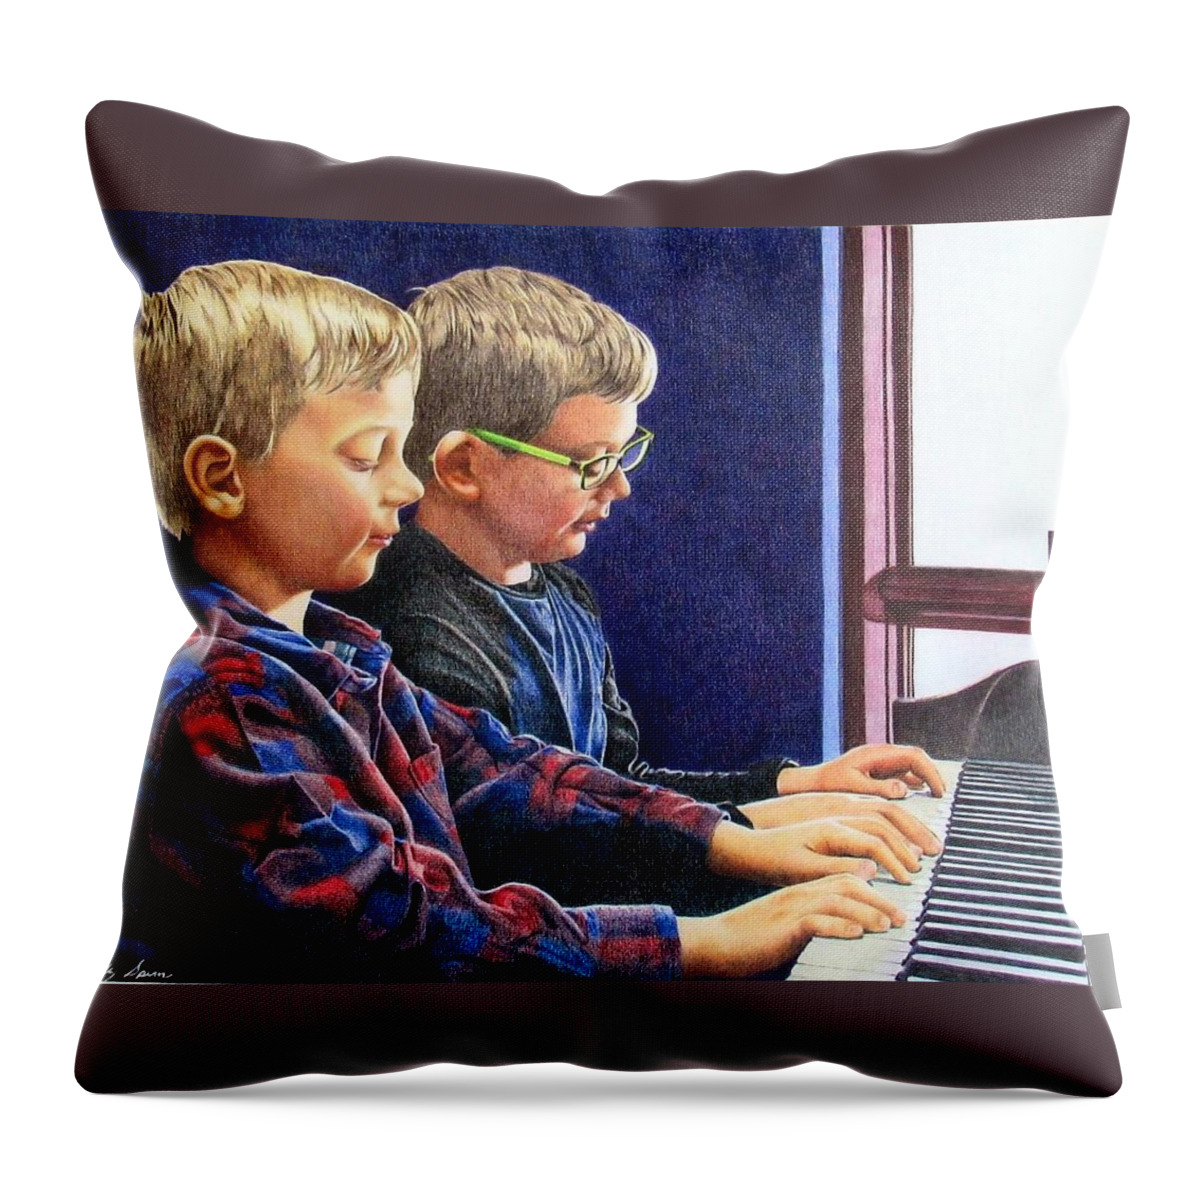 Piano Throw Pillow featuring the drawing Duet by Kelly Speros